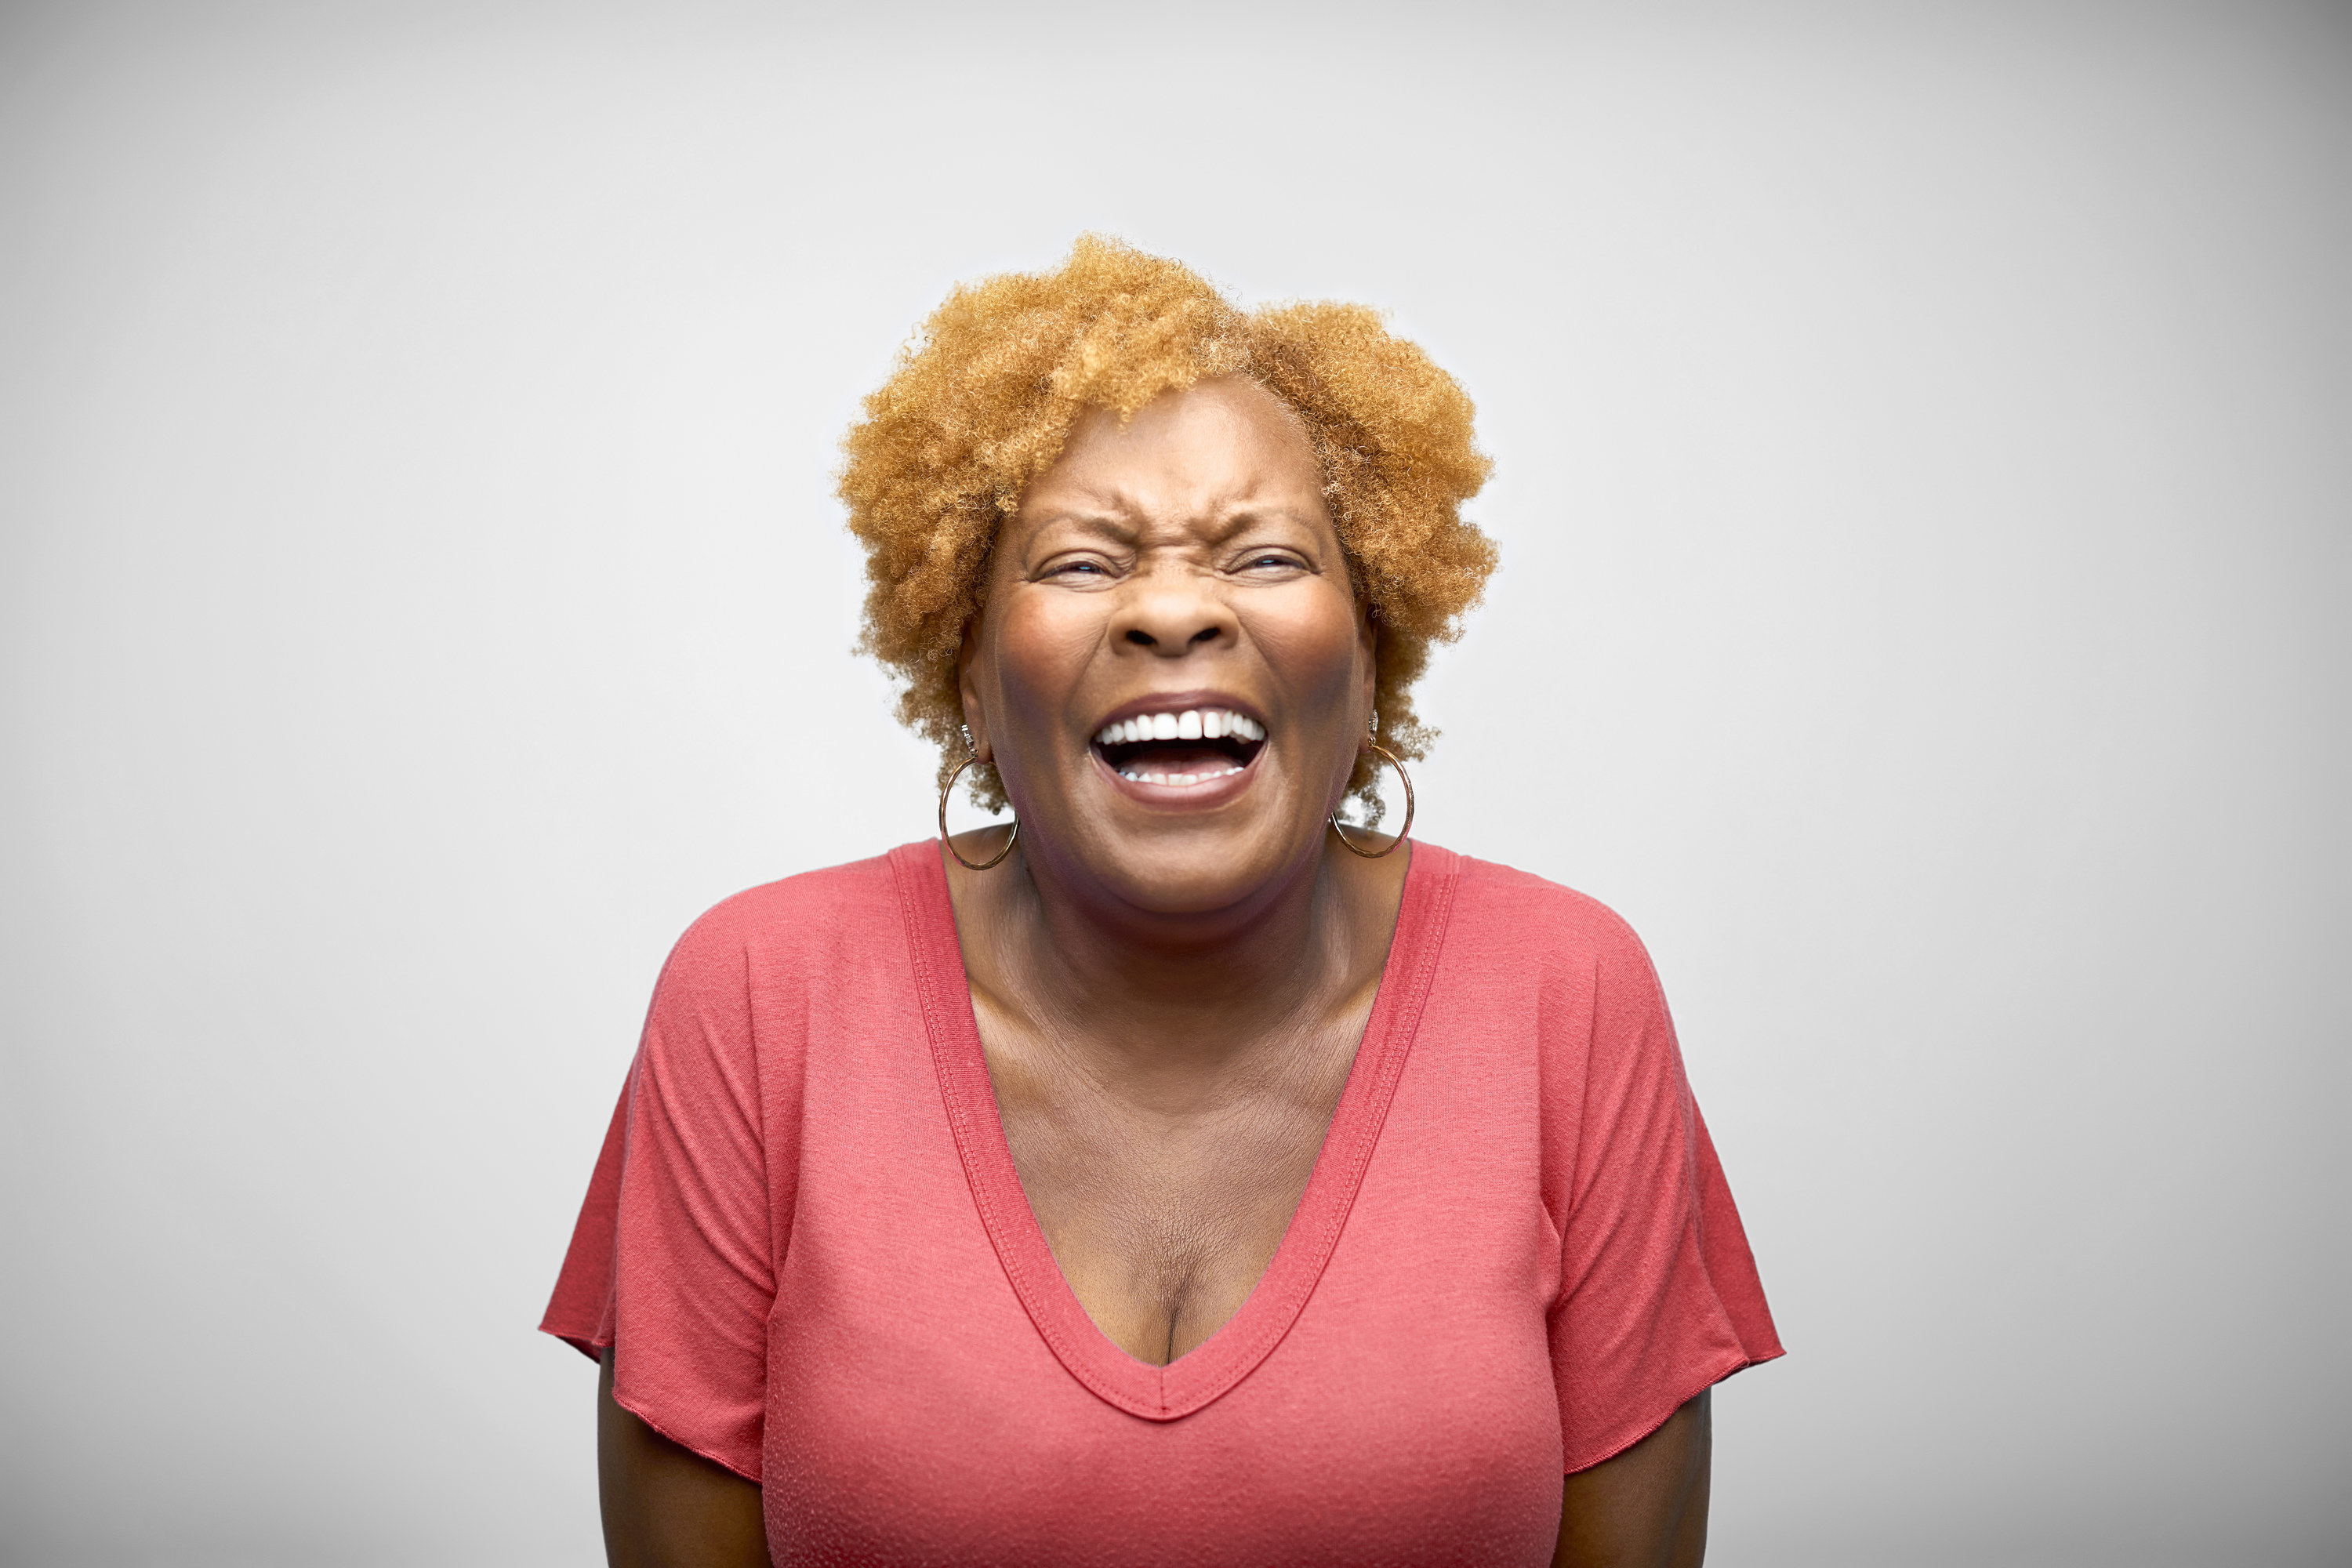 Mature African American woman laughing against white background